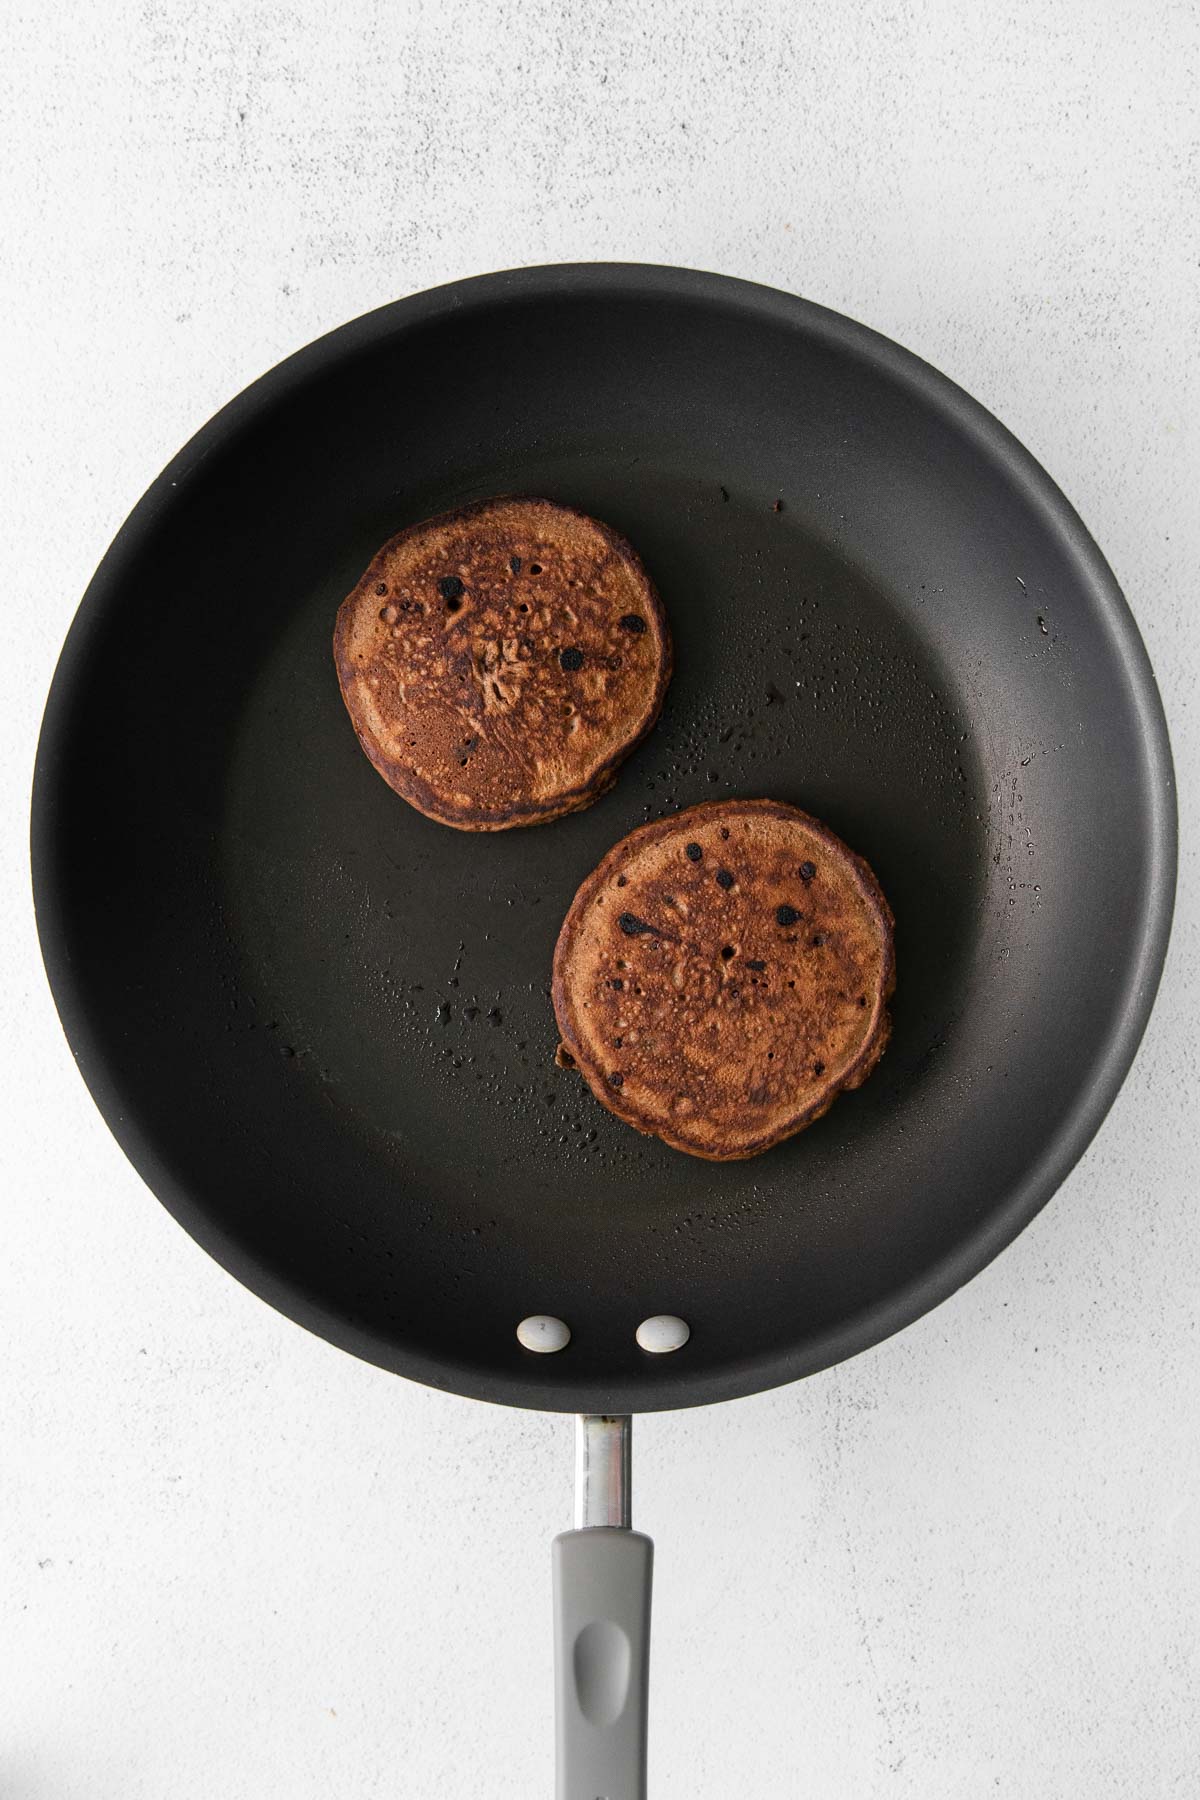 black skillet with two chocolate pancakes cooking